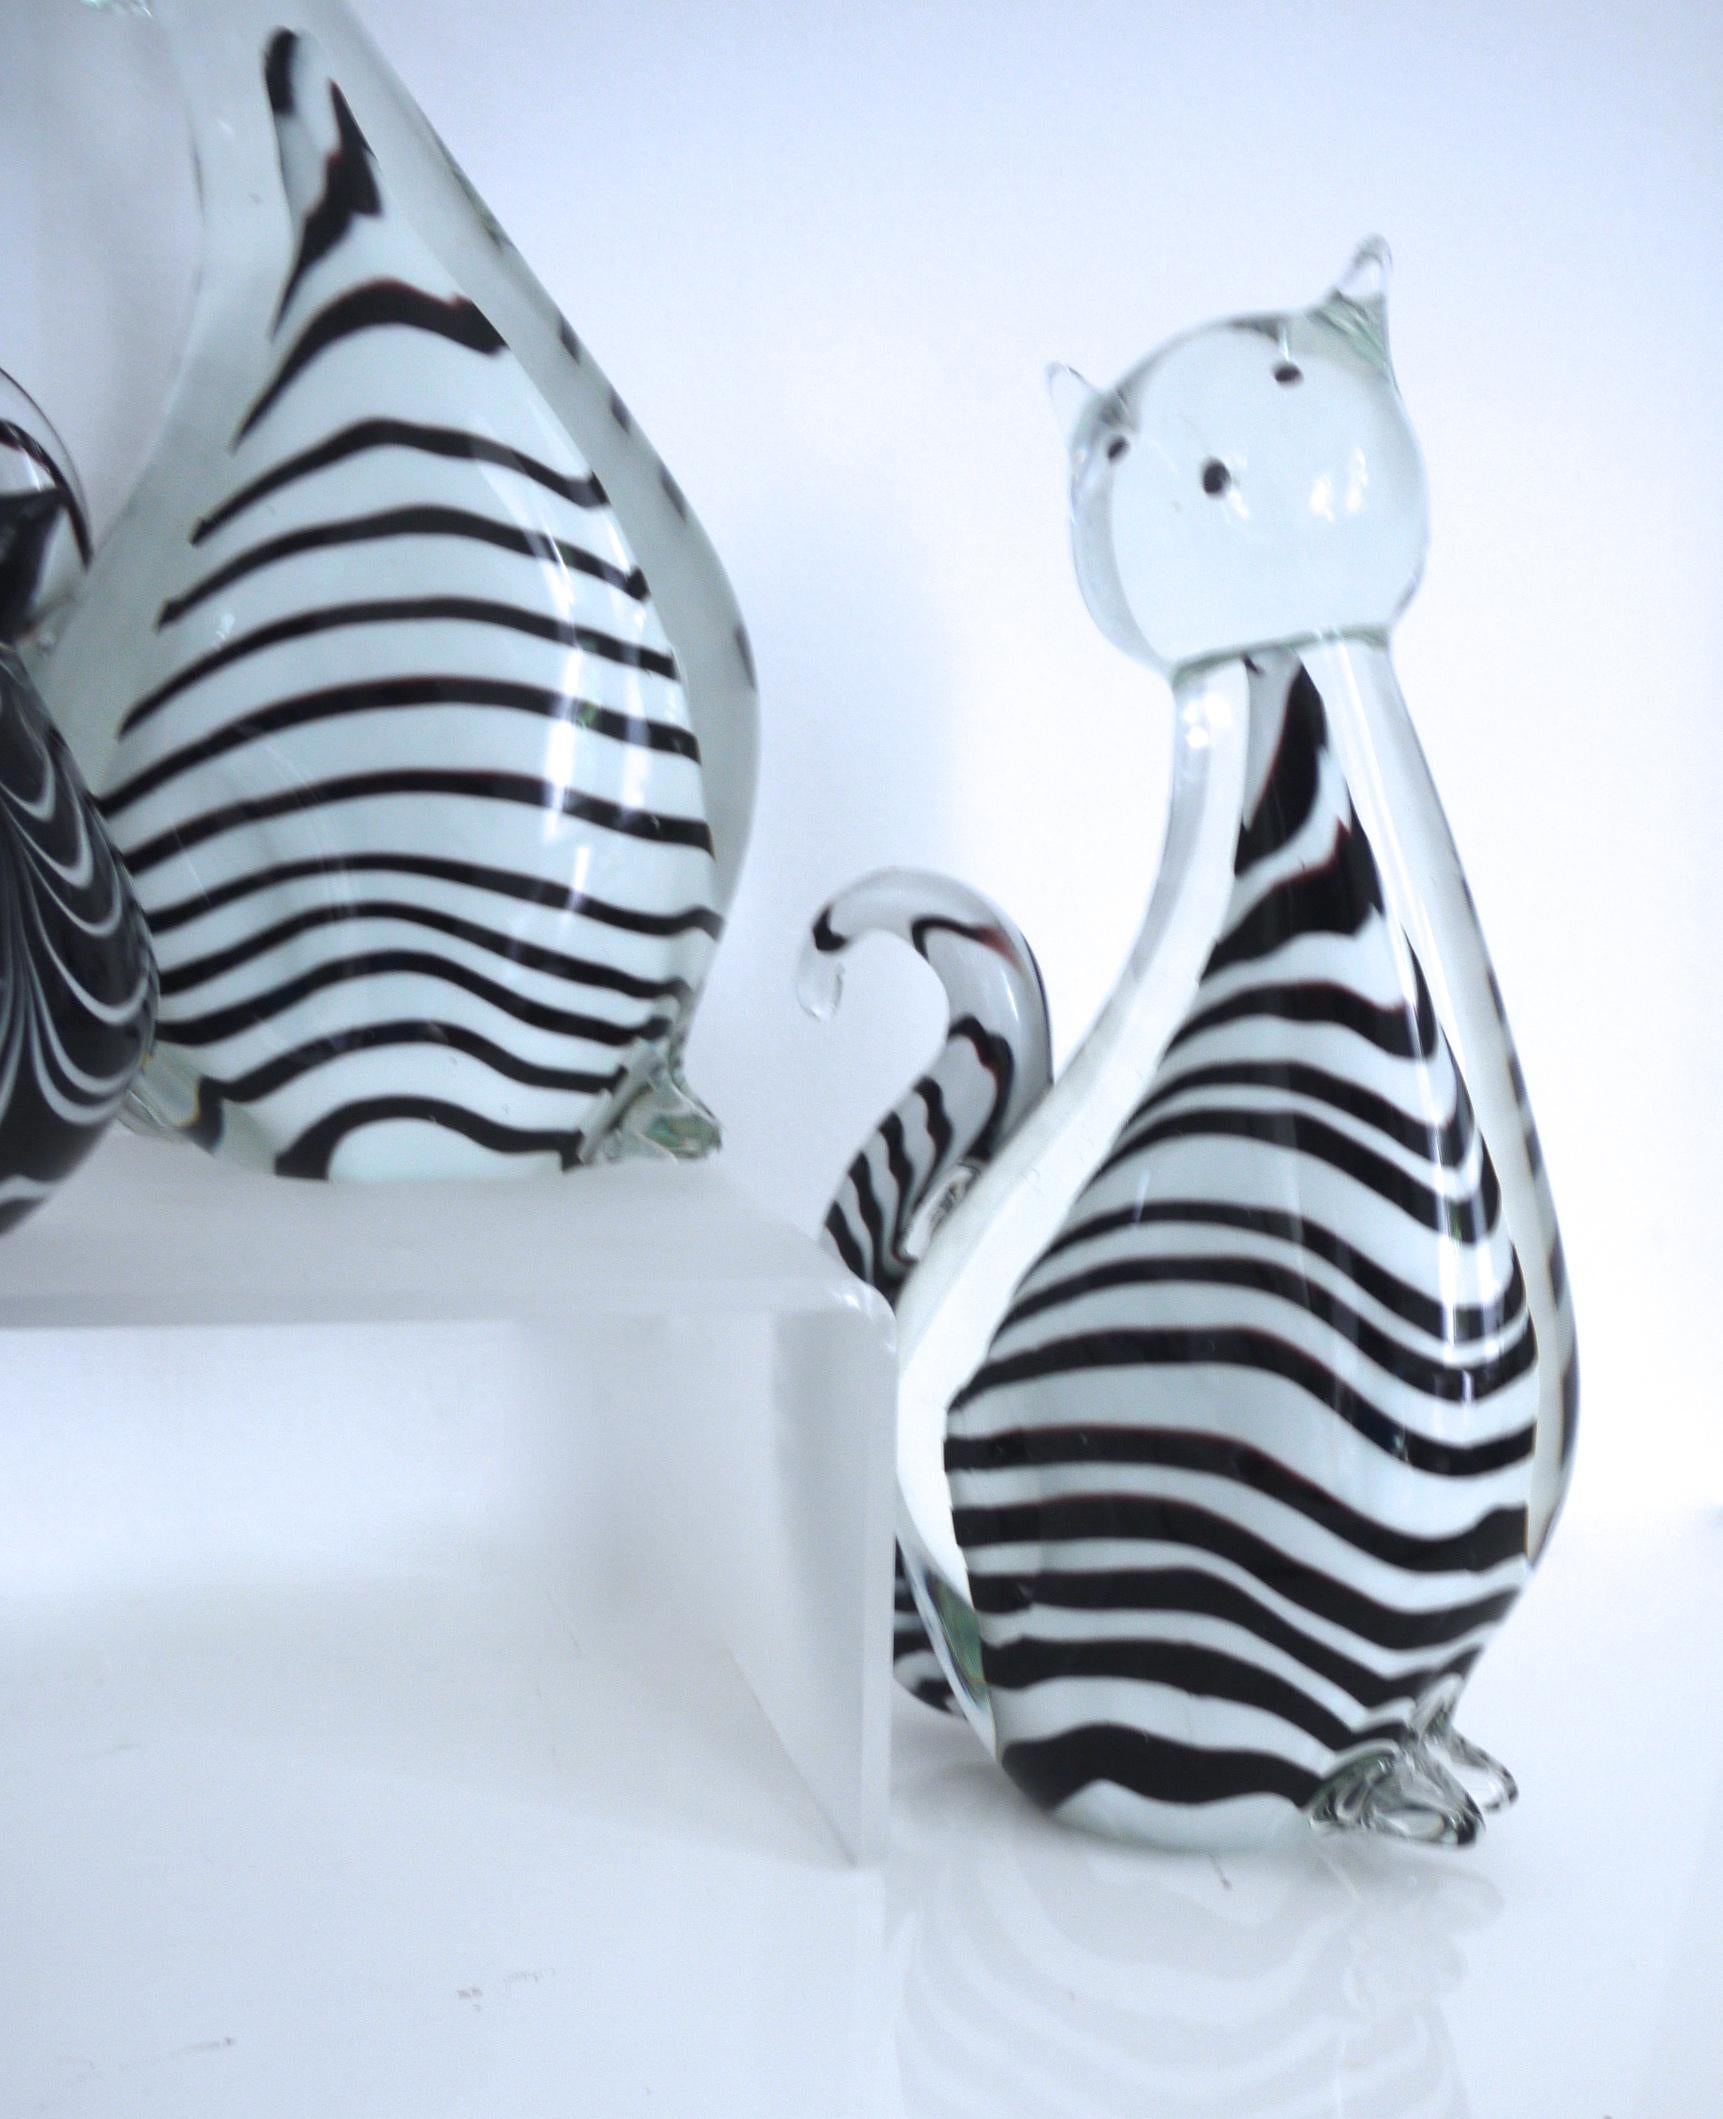 3 Piece Collection Murano Art Glass Striped Cats ‘2.5kg each’ and Bird, 1980s For Sale 1